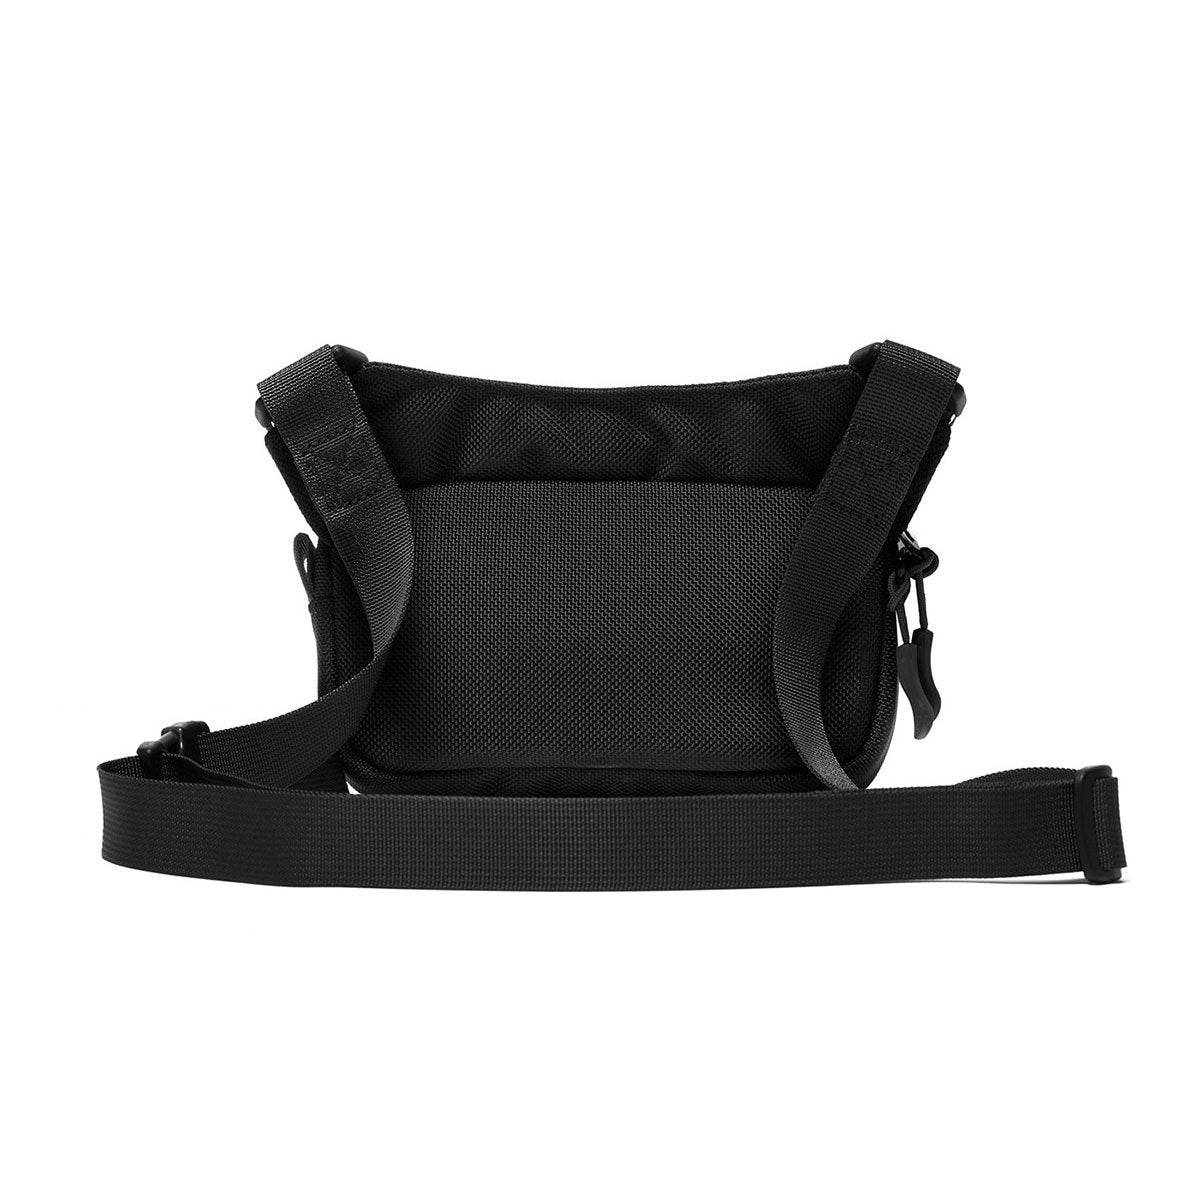 DSPTCH SLING POUCH - SMALL